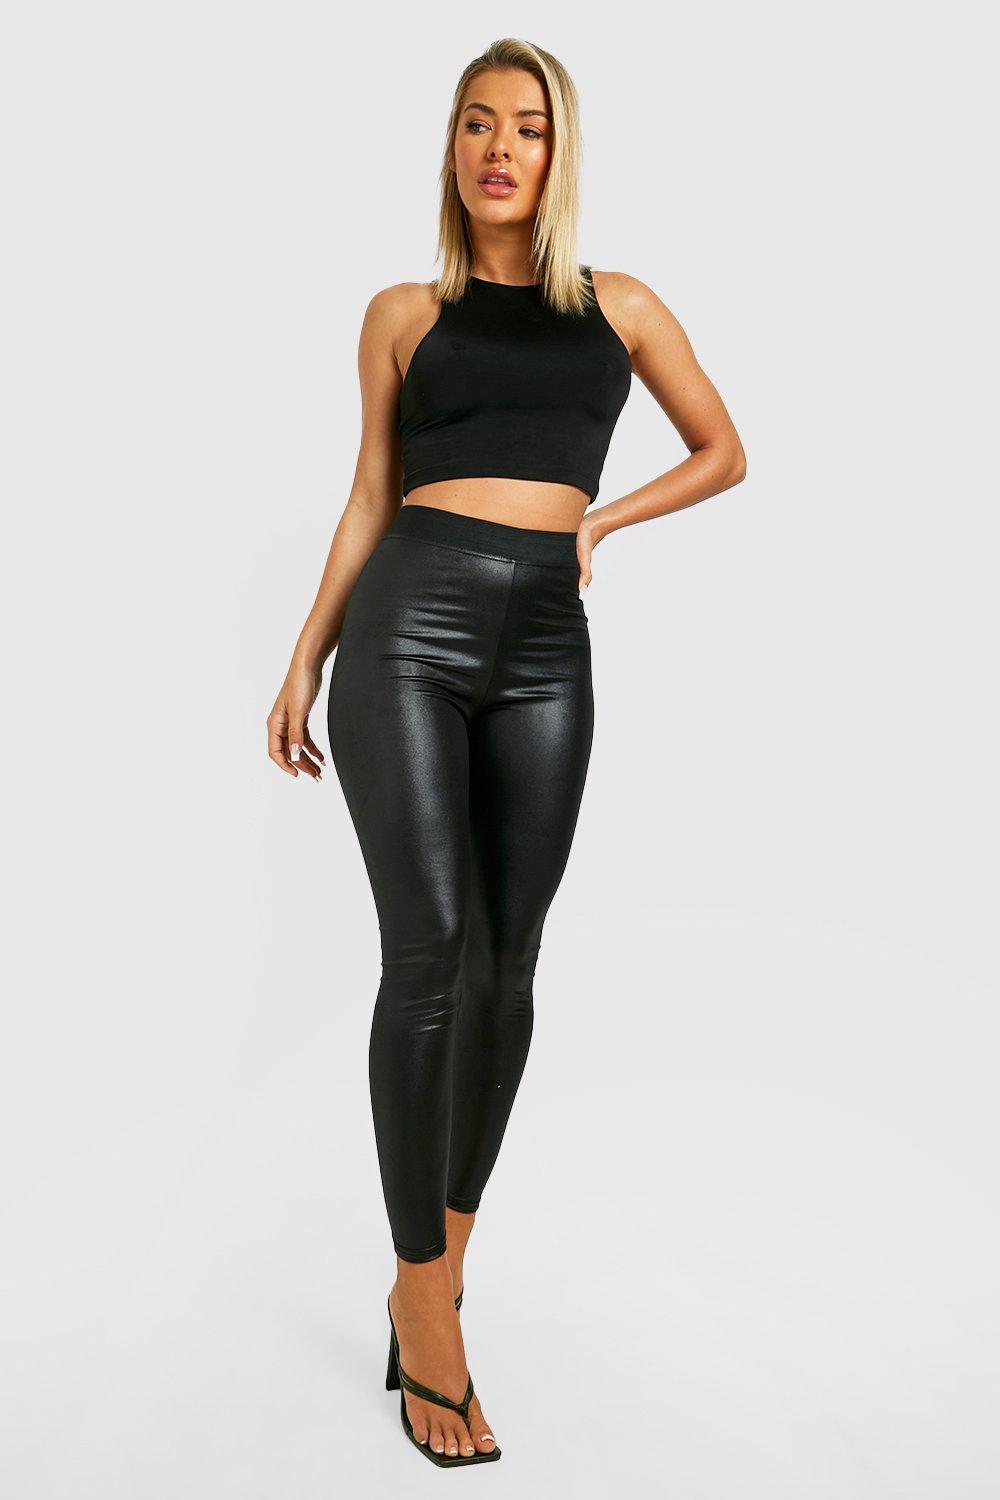 Cinched High Waisted Wet Look Leggings